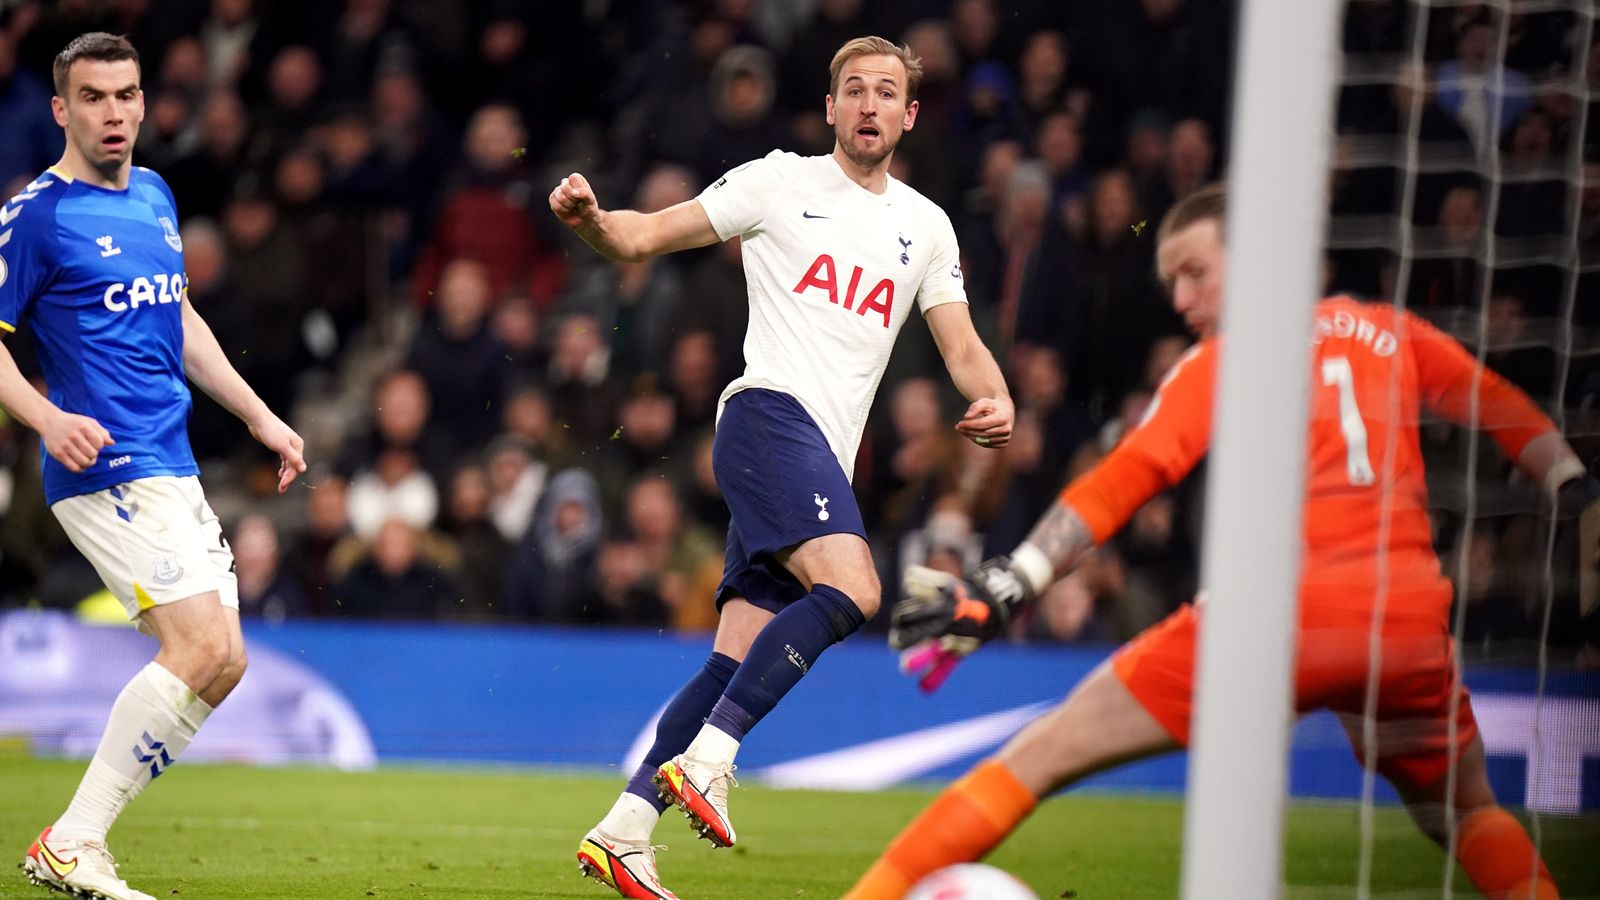 Harry Kane now above Thierry Henry on Premier League top scorers list | Teddy Sheringham calls him best No 9 in world